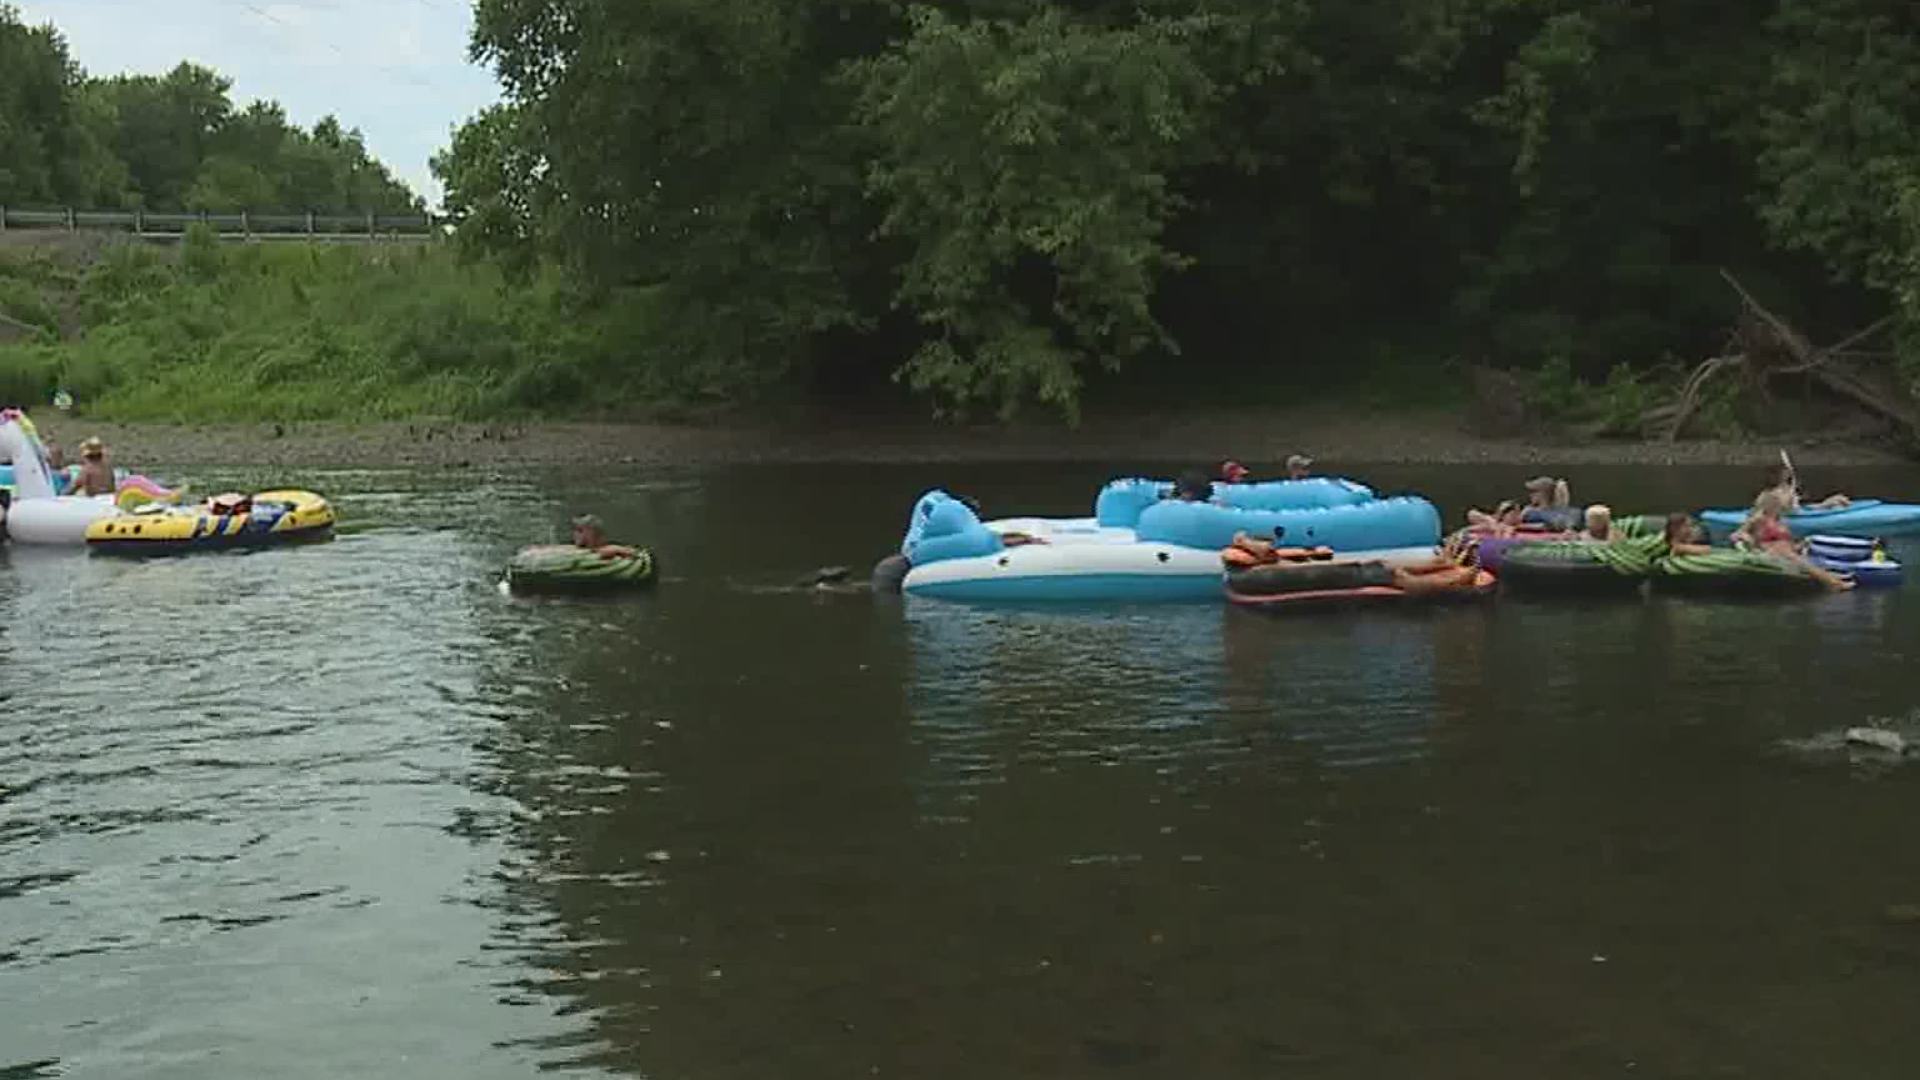 8 years after Kortne's disappearance, dozens float down the Swatara Creek to bring awareness to the open case